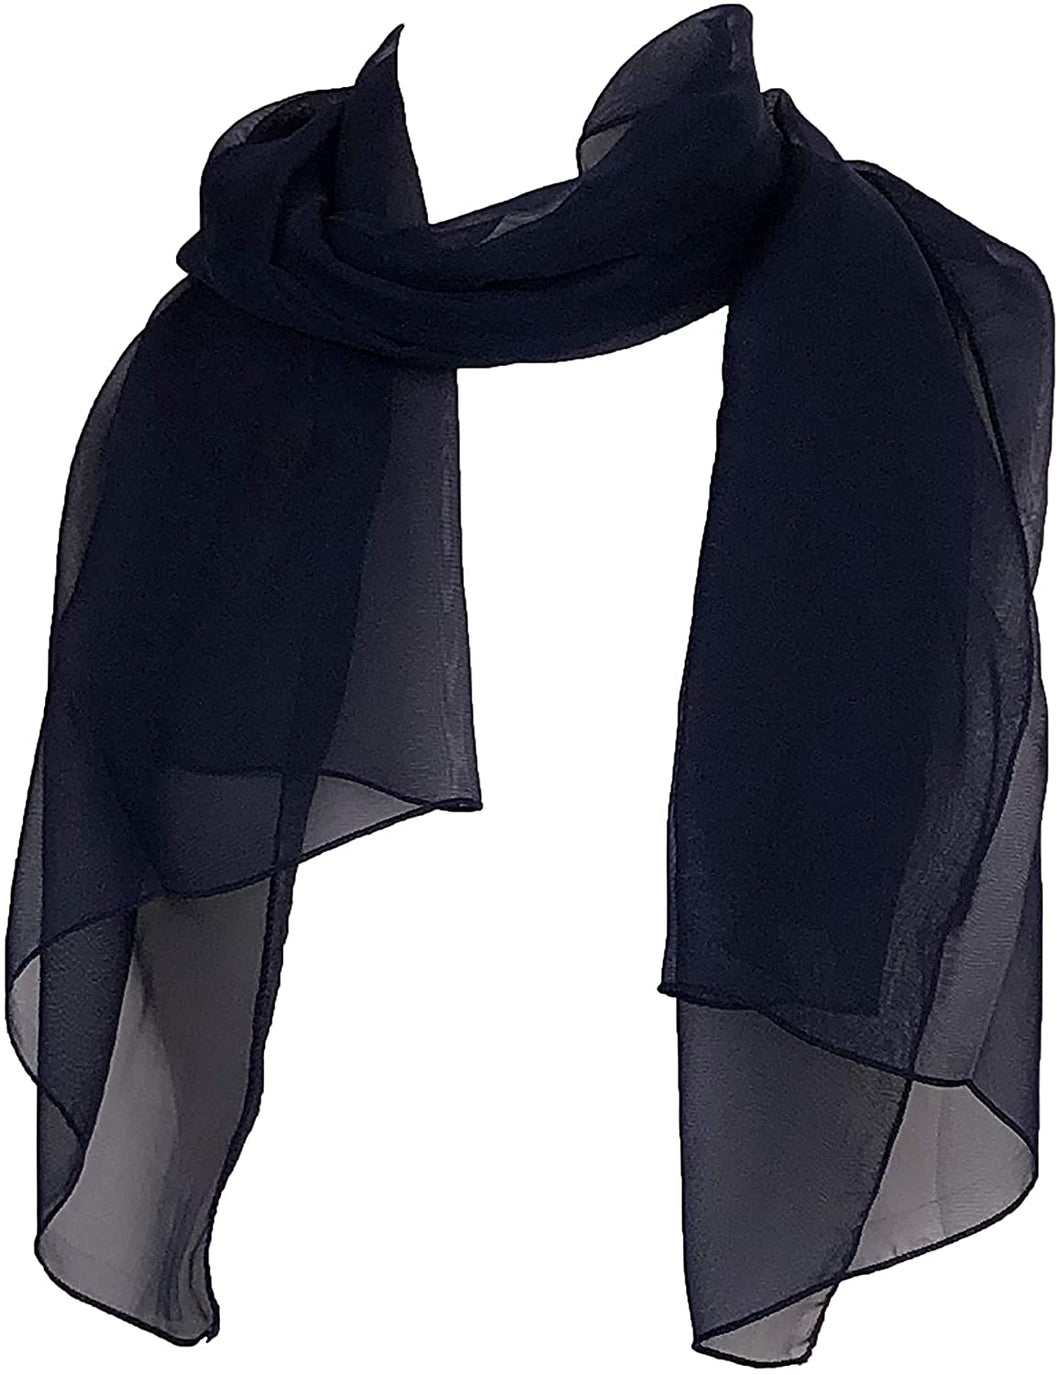 Plain Navy Chiffon Style Scarf Thin Pretty Scarf Great for Any Outfit Lovely Gift